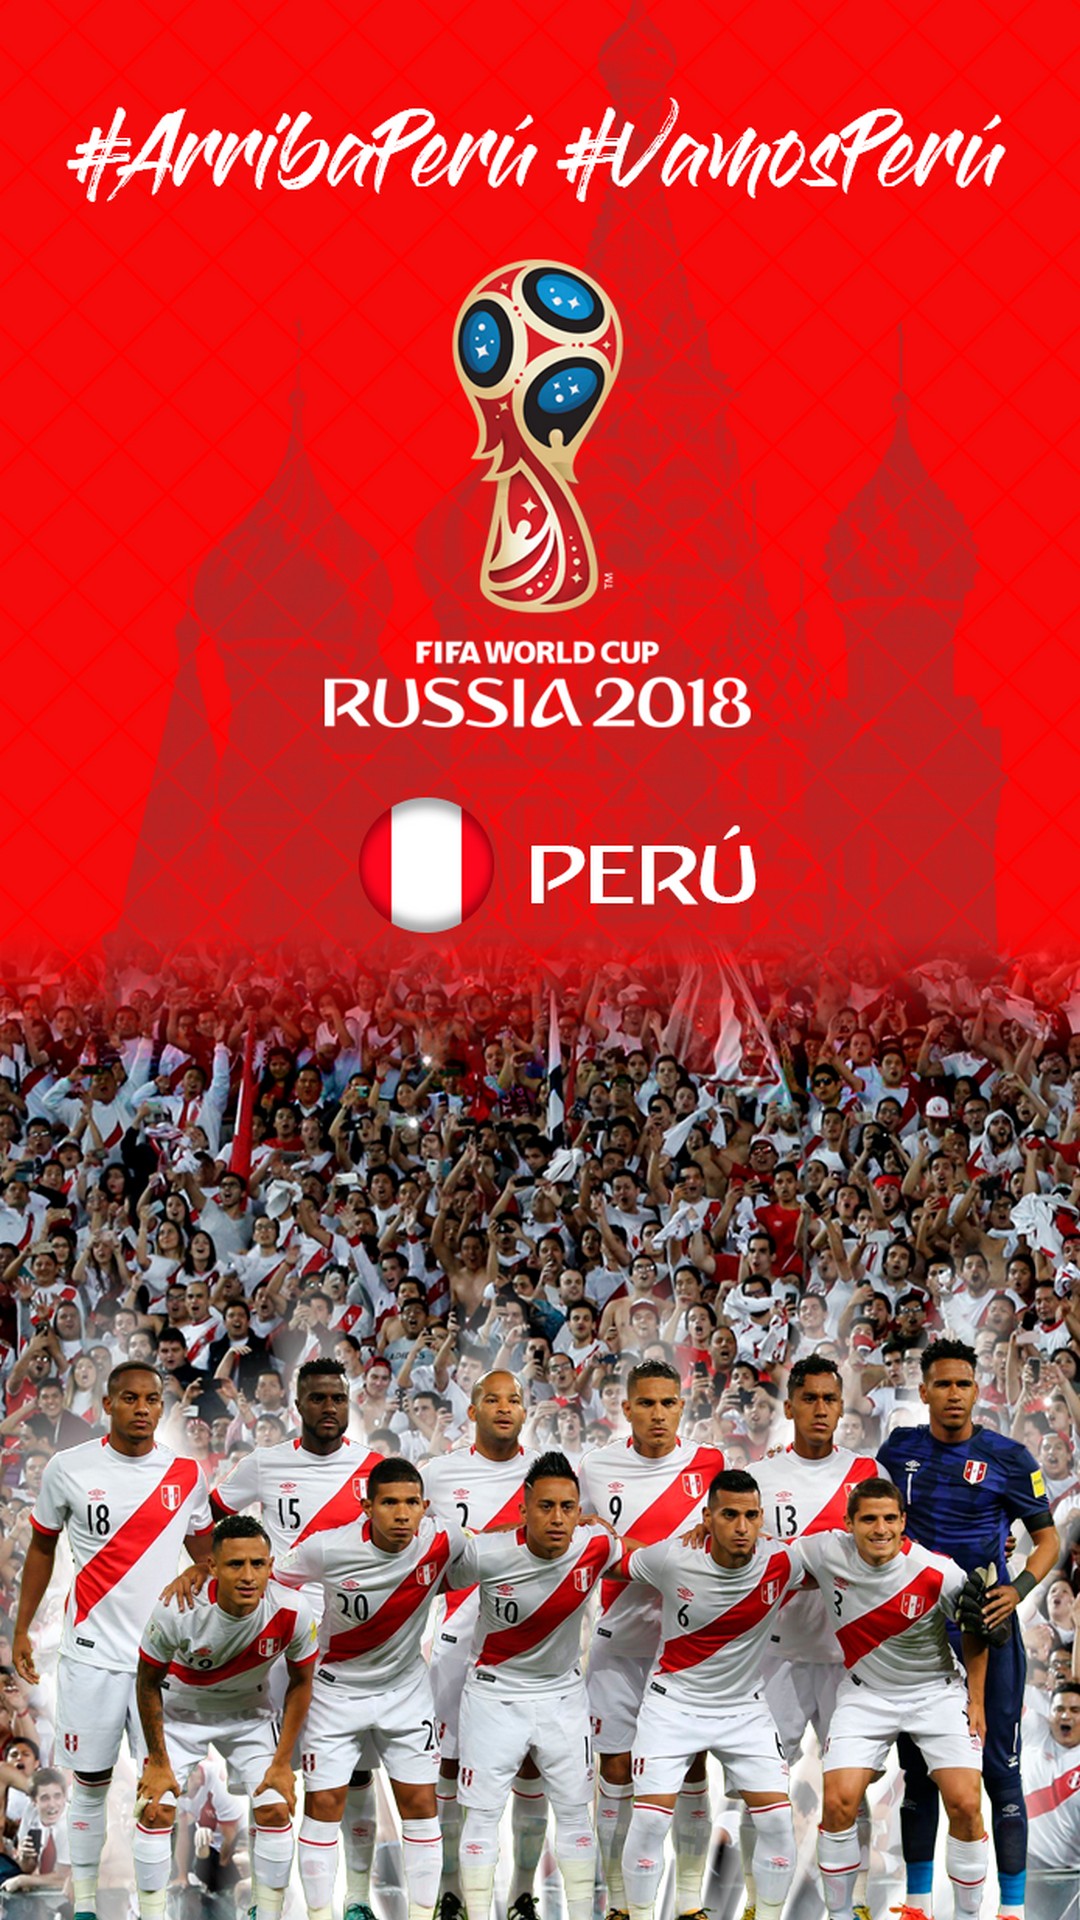 Peru National Team HD Wallpaper For iPhone with resolution 1080x1920 pixel. You can make this wallpaper for your Mac or Windows Desktop Background, iPhone, Android or Tablet and another Smartphone device